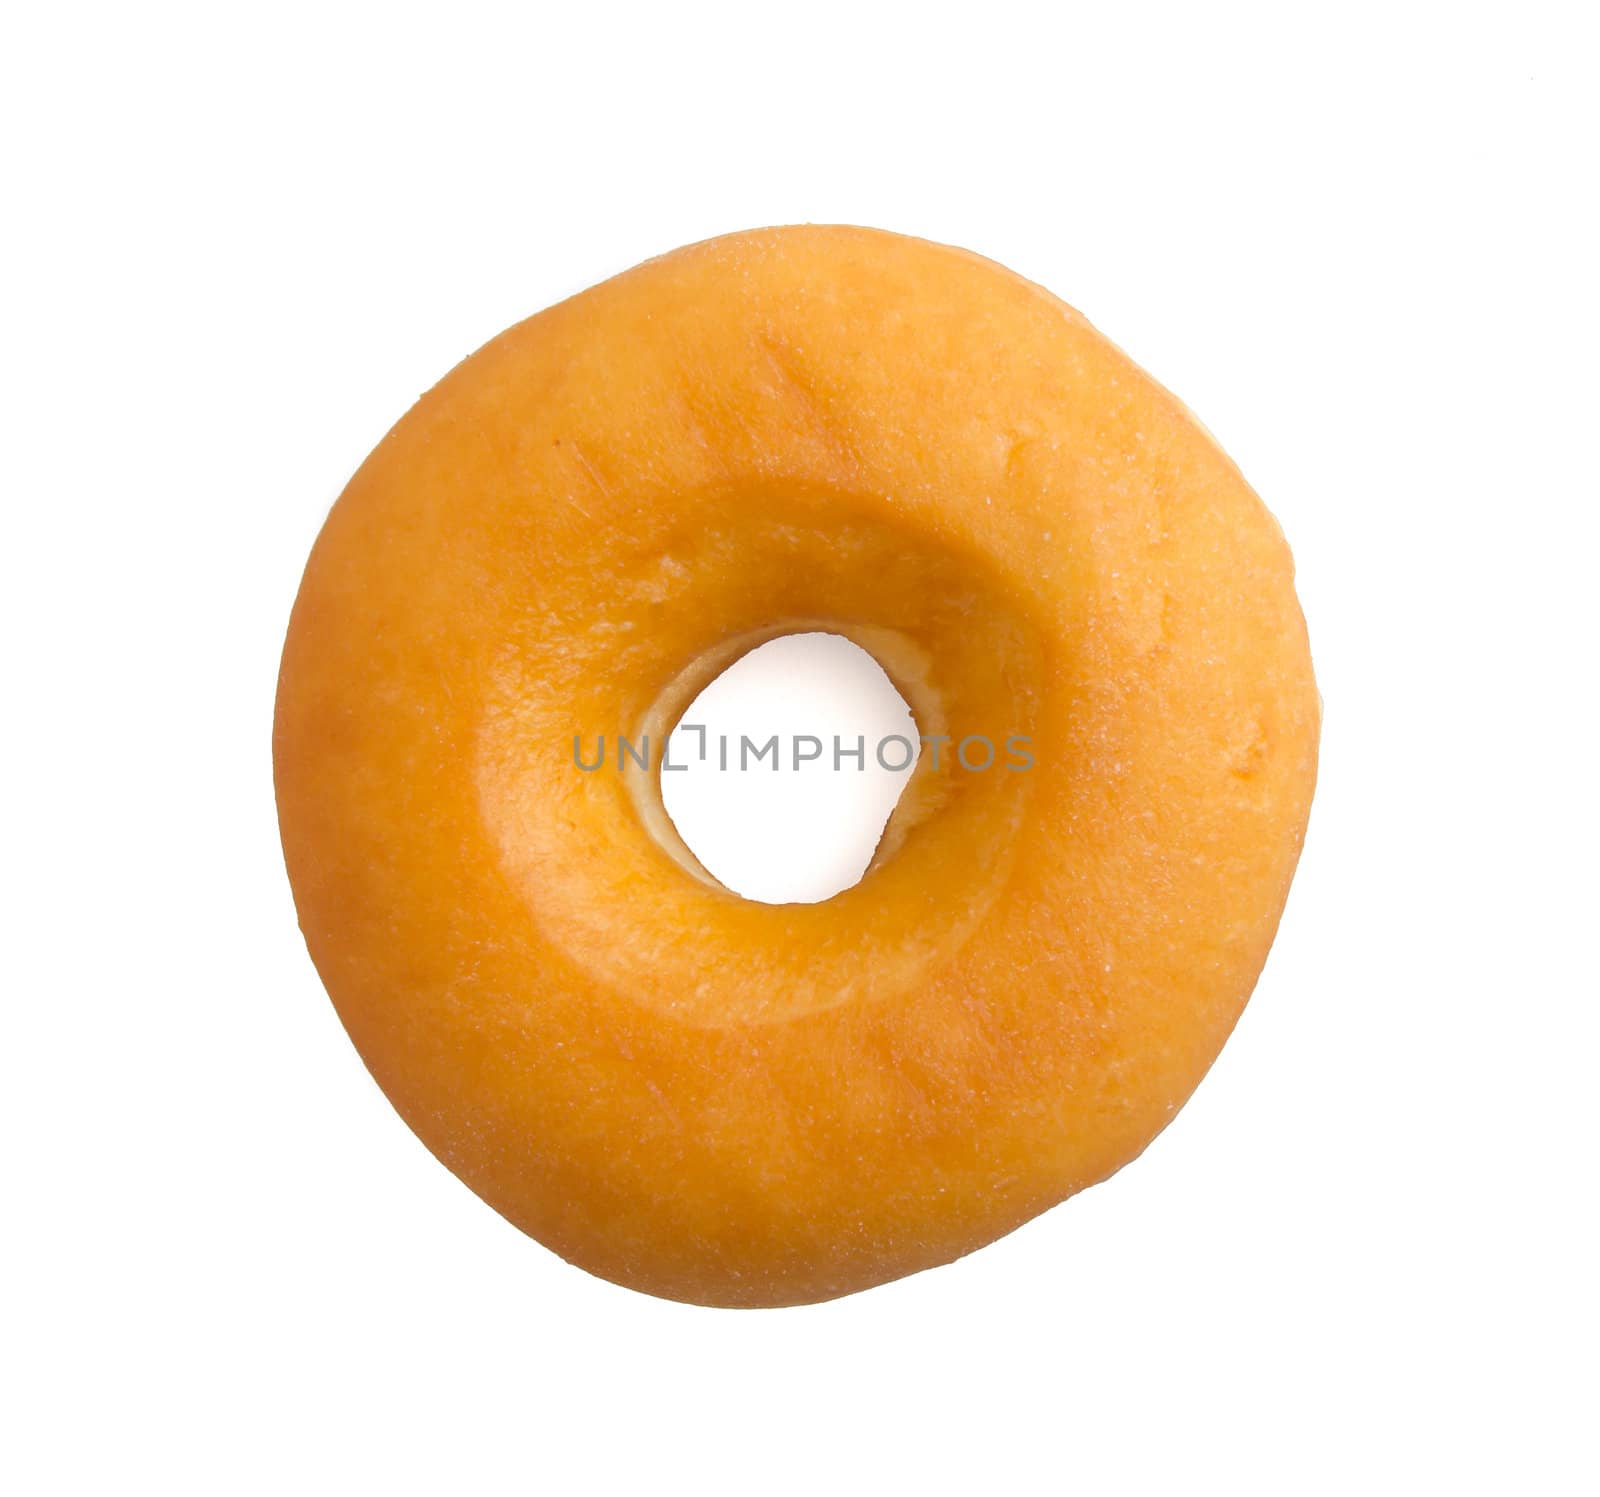 donut isolated on white background by heinteh